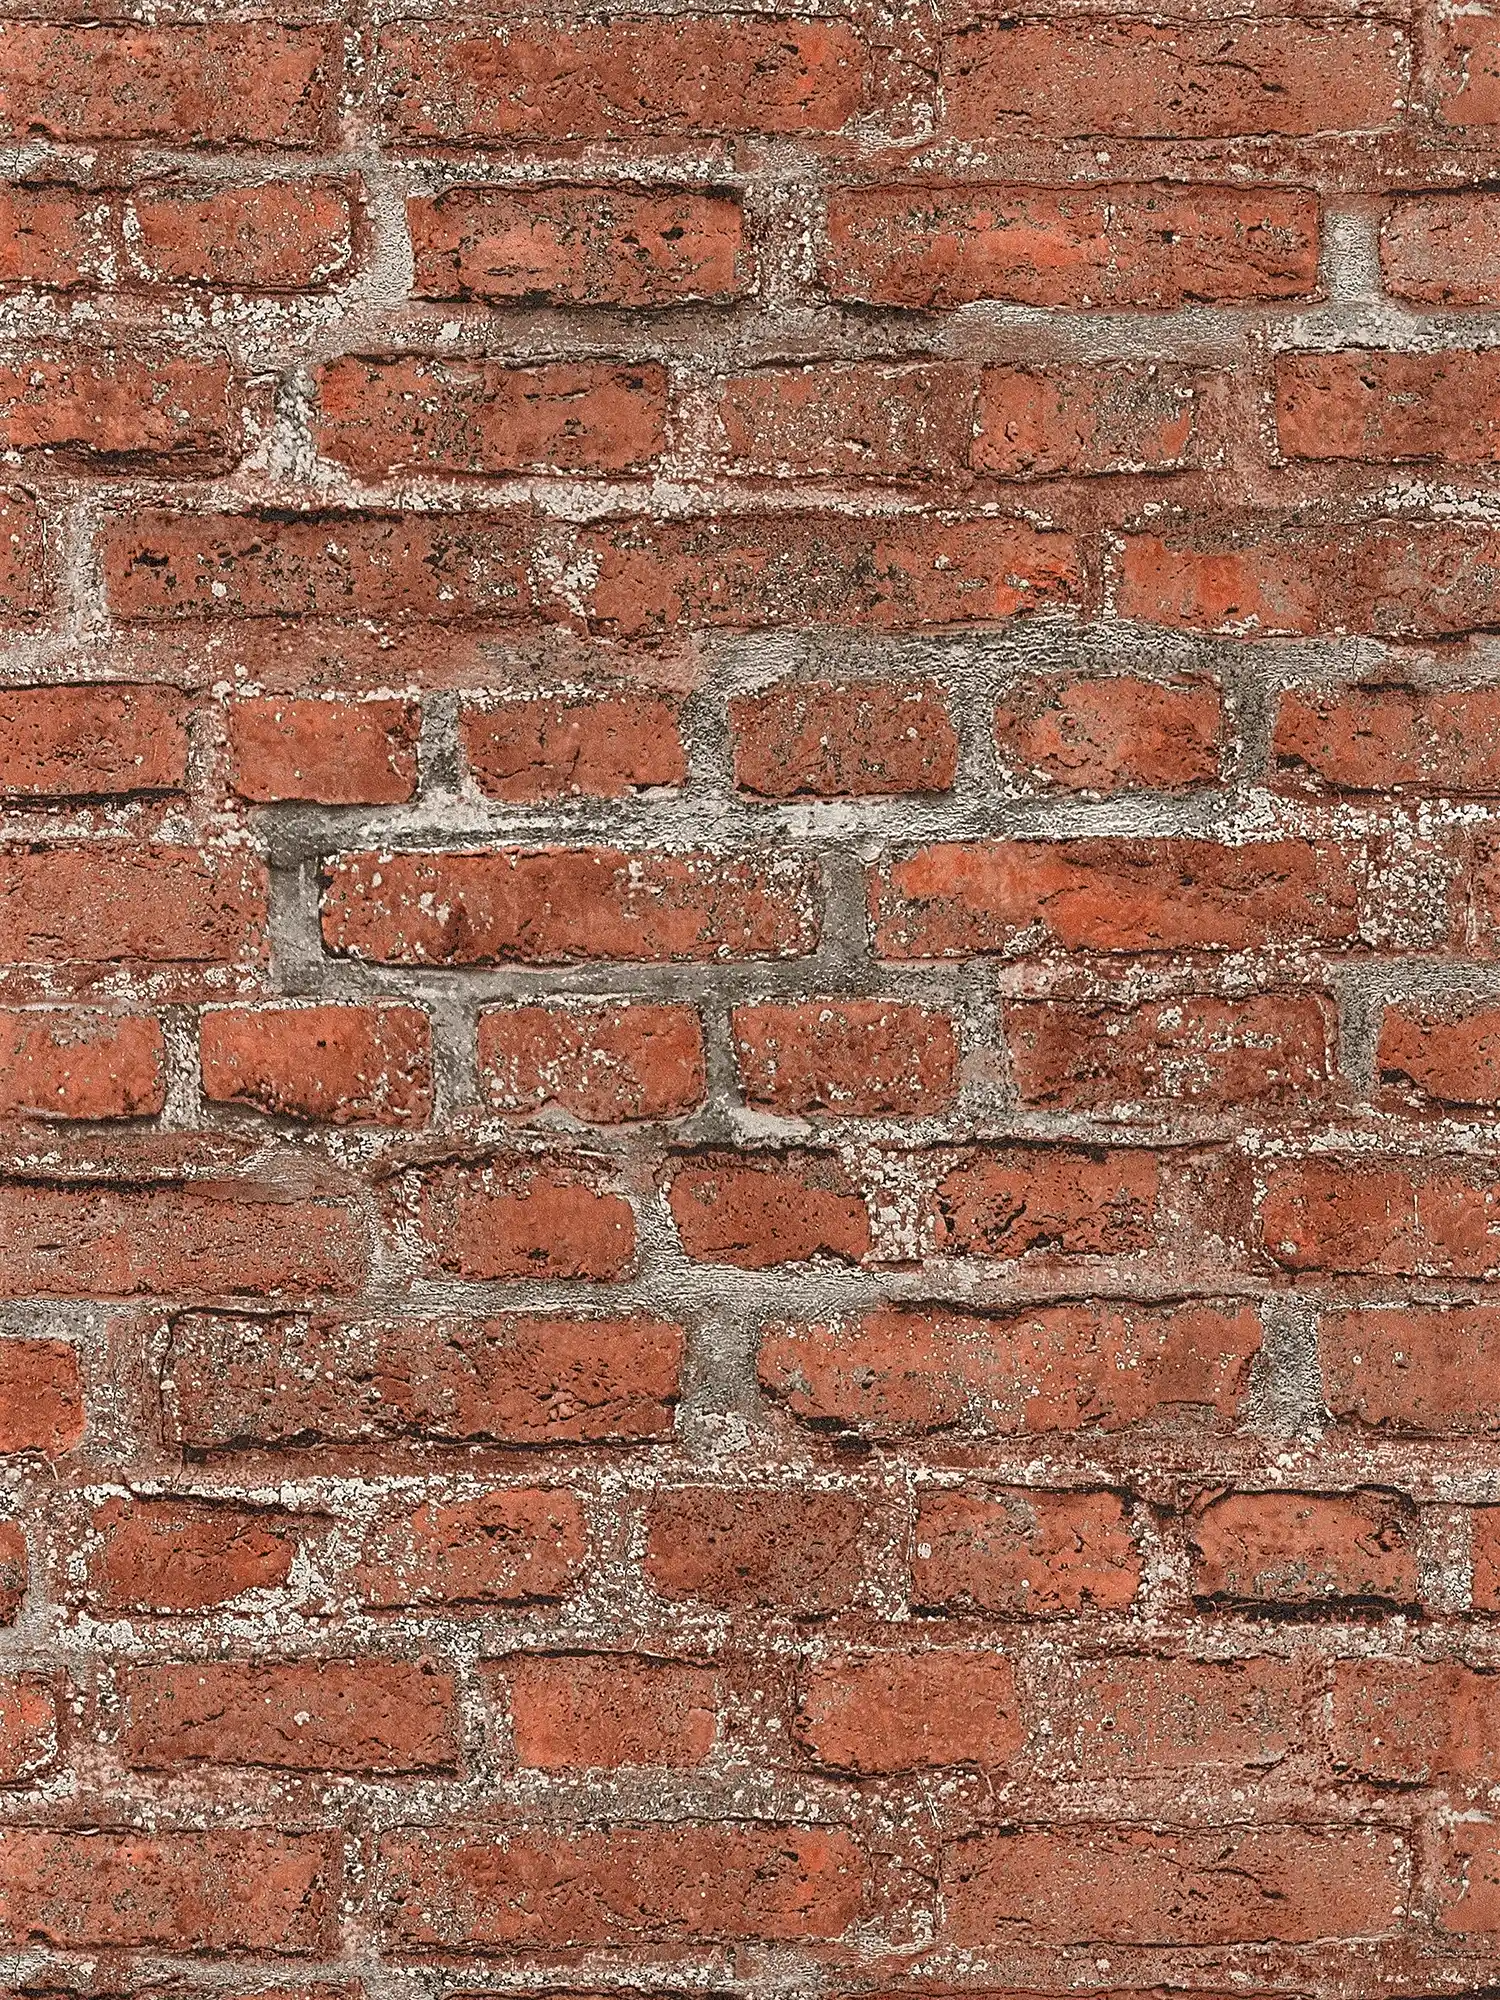         Wallpaper in stone look with bricks, brick - red, grey
    